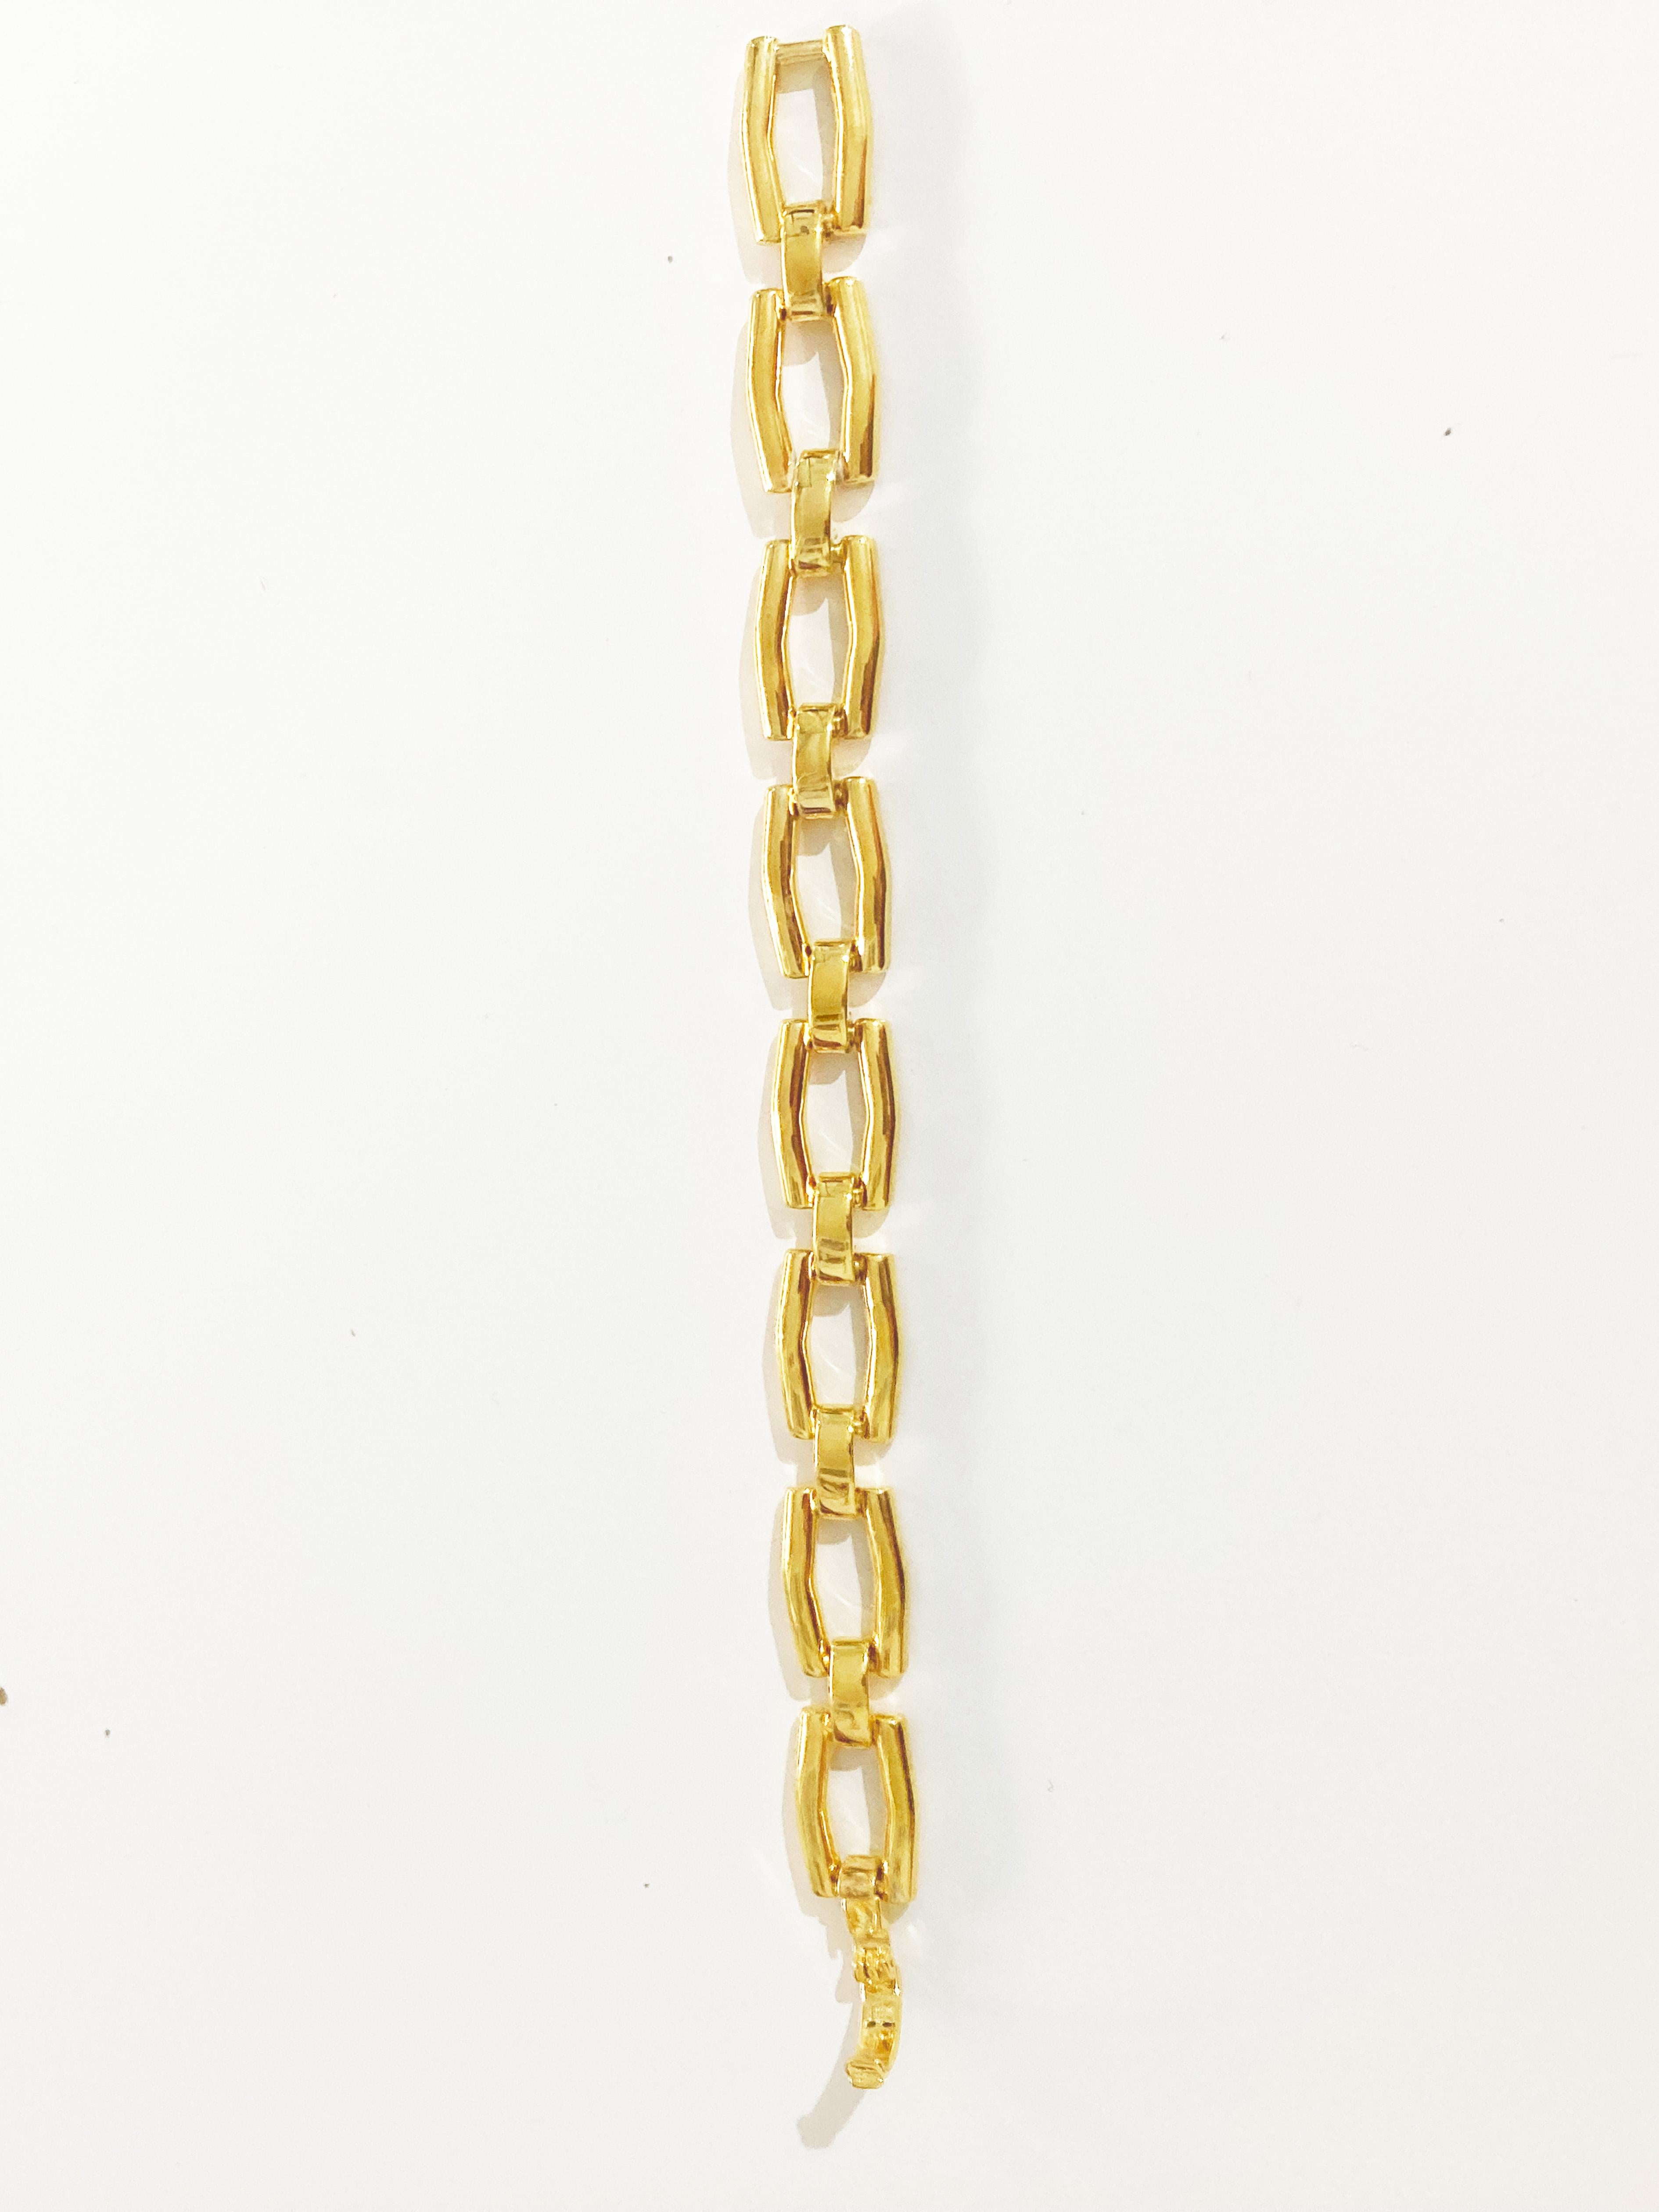 Rossella Ugolini 24K Yellow Gold Plated Unique Links Chain Bracelet In New Condition For Sale In Rome, IT